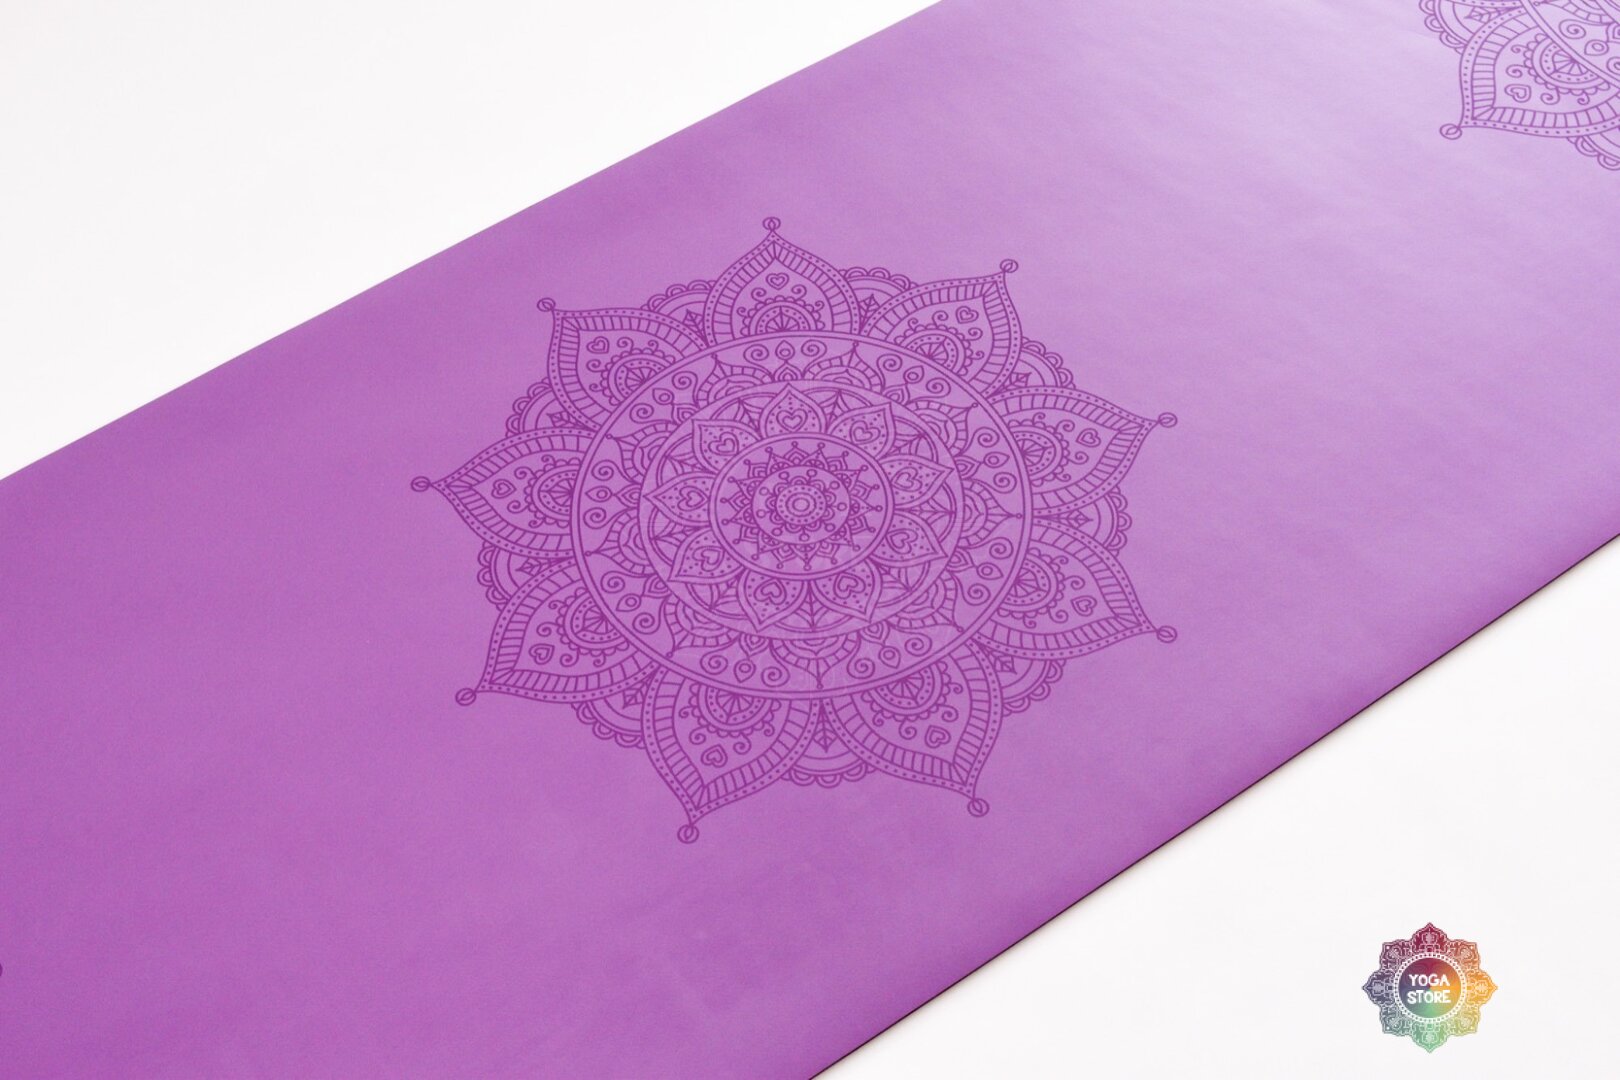 YOGGYS SMALL YOGA MAT [MANDALA BLACK] - YOGA STORE - Everything for your  yoga practice. With style and high quality.